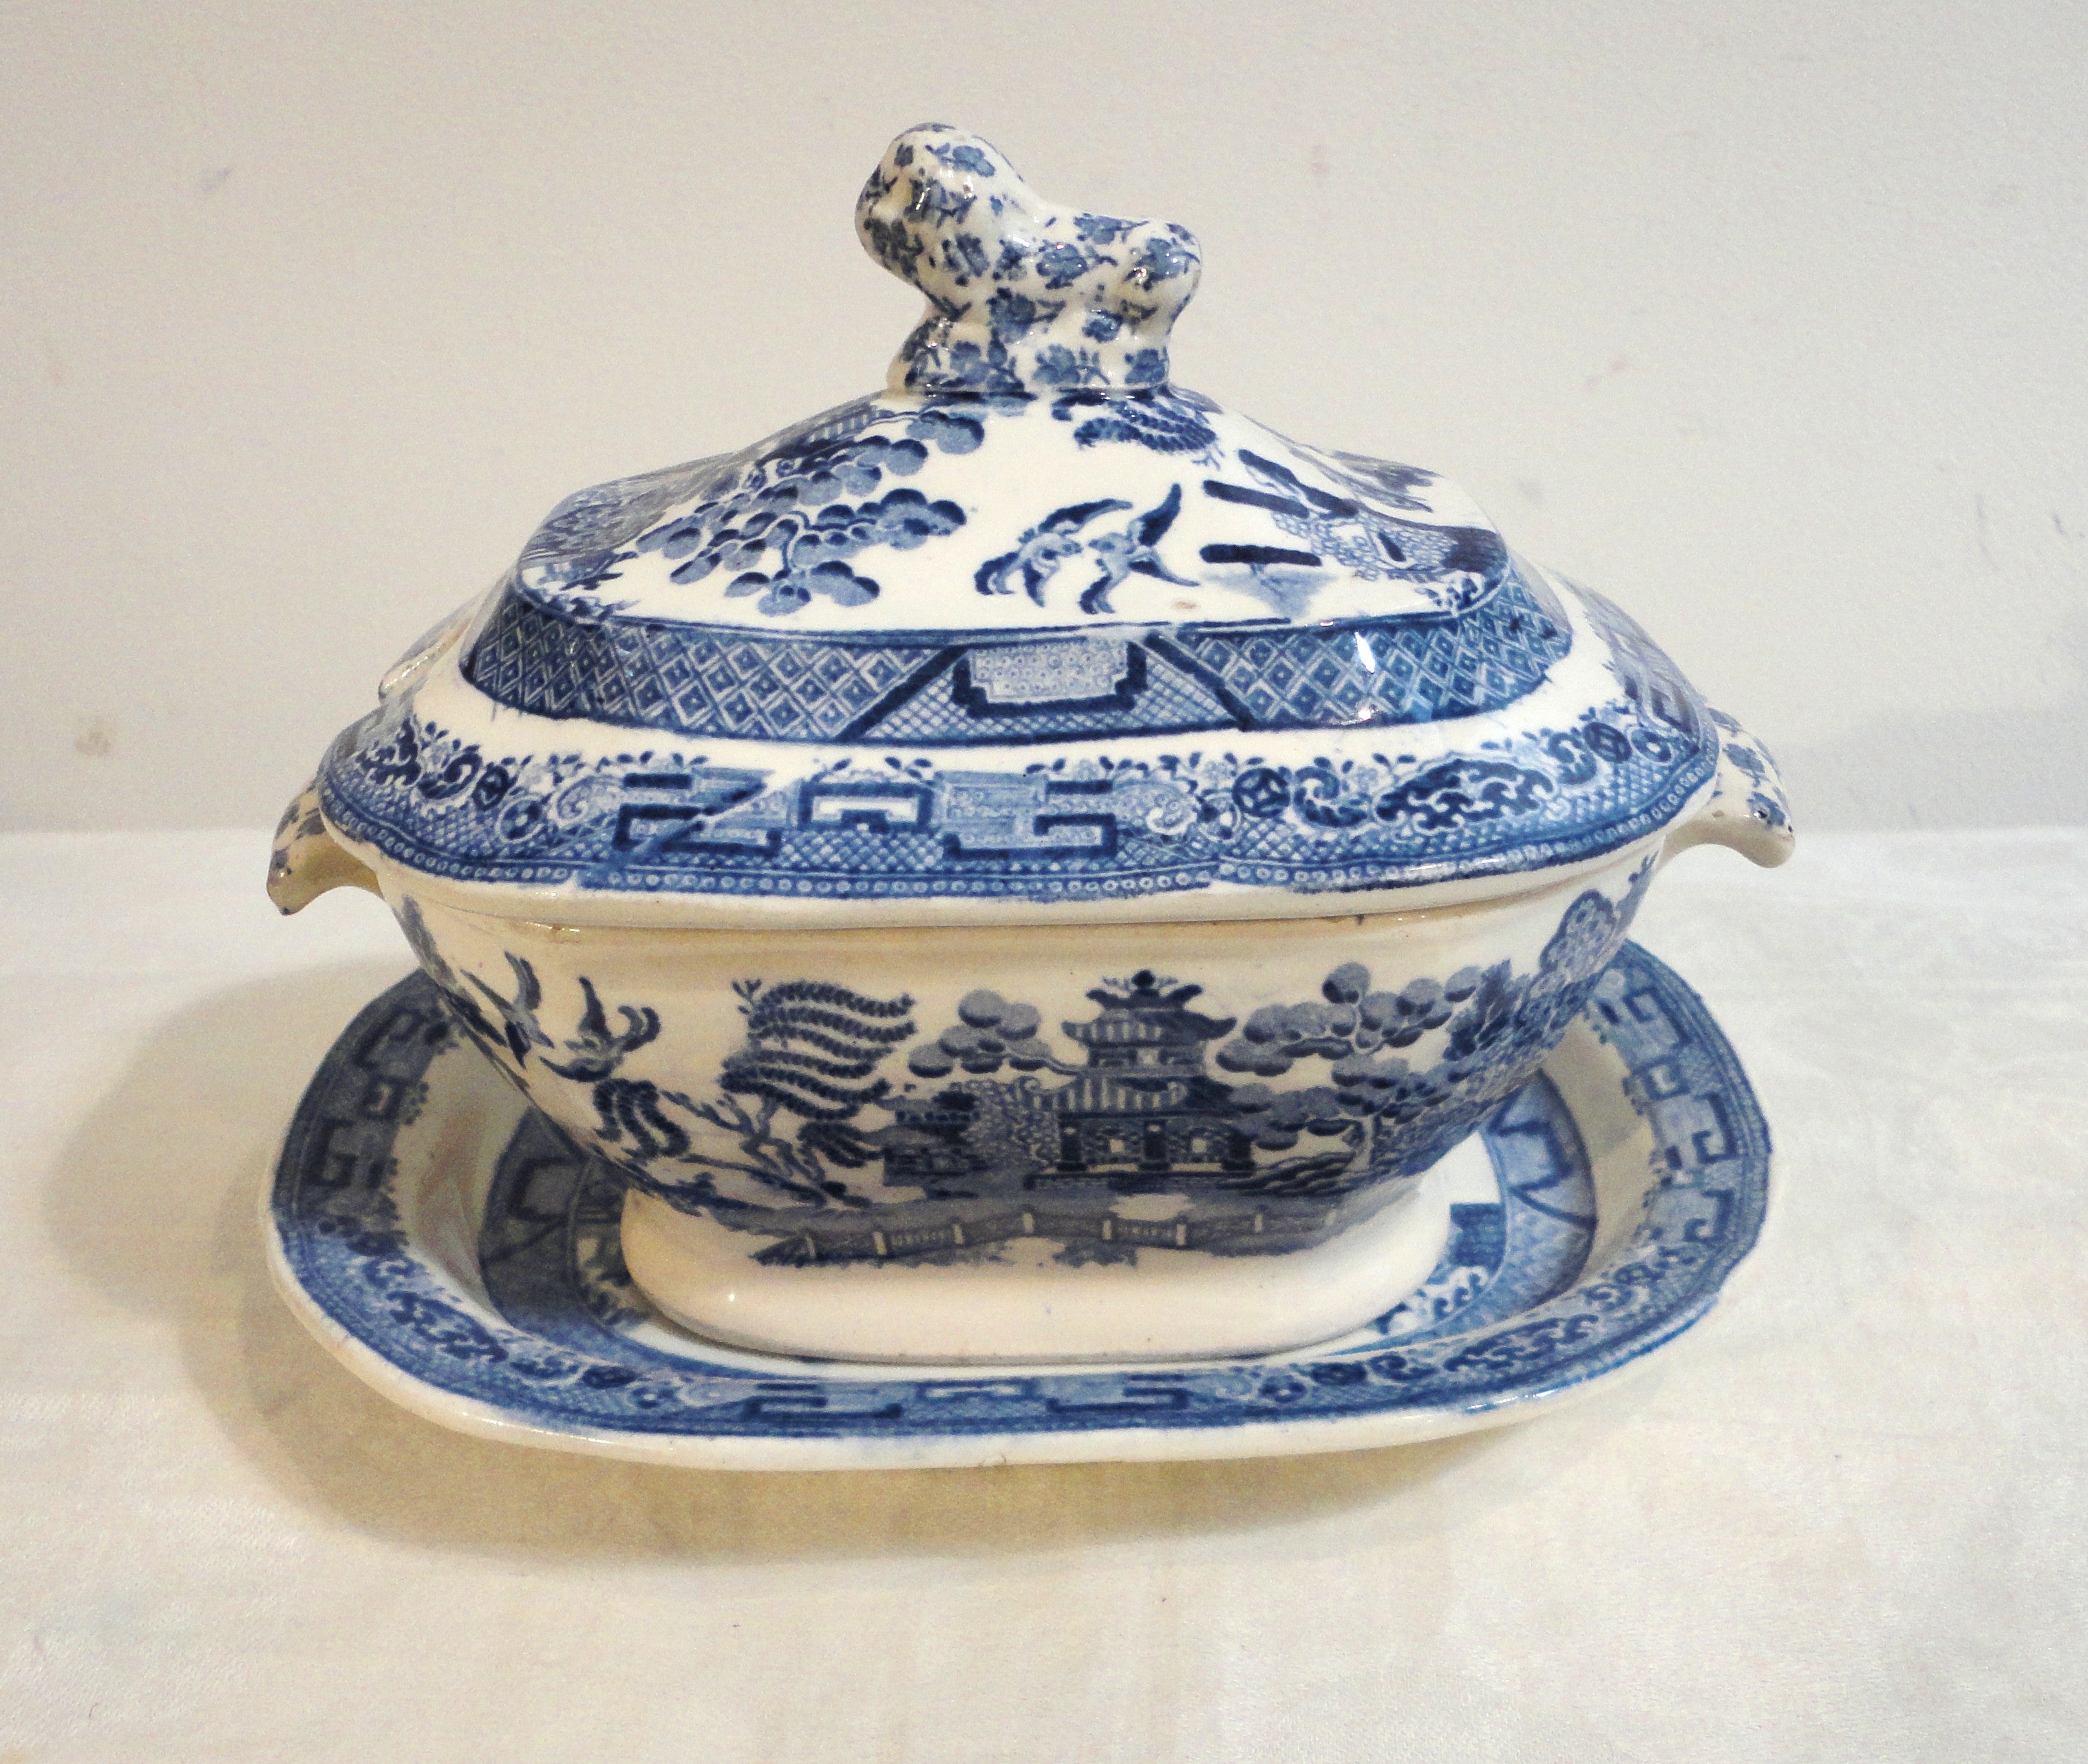 19th Century Early Spode England Blue Willow Tureen